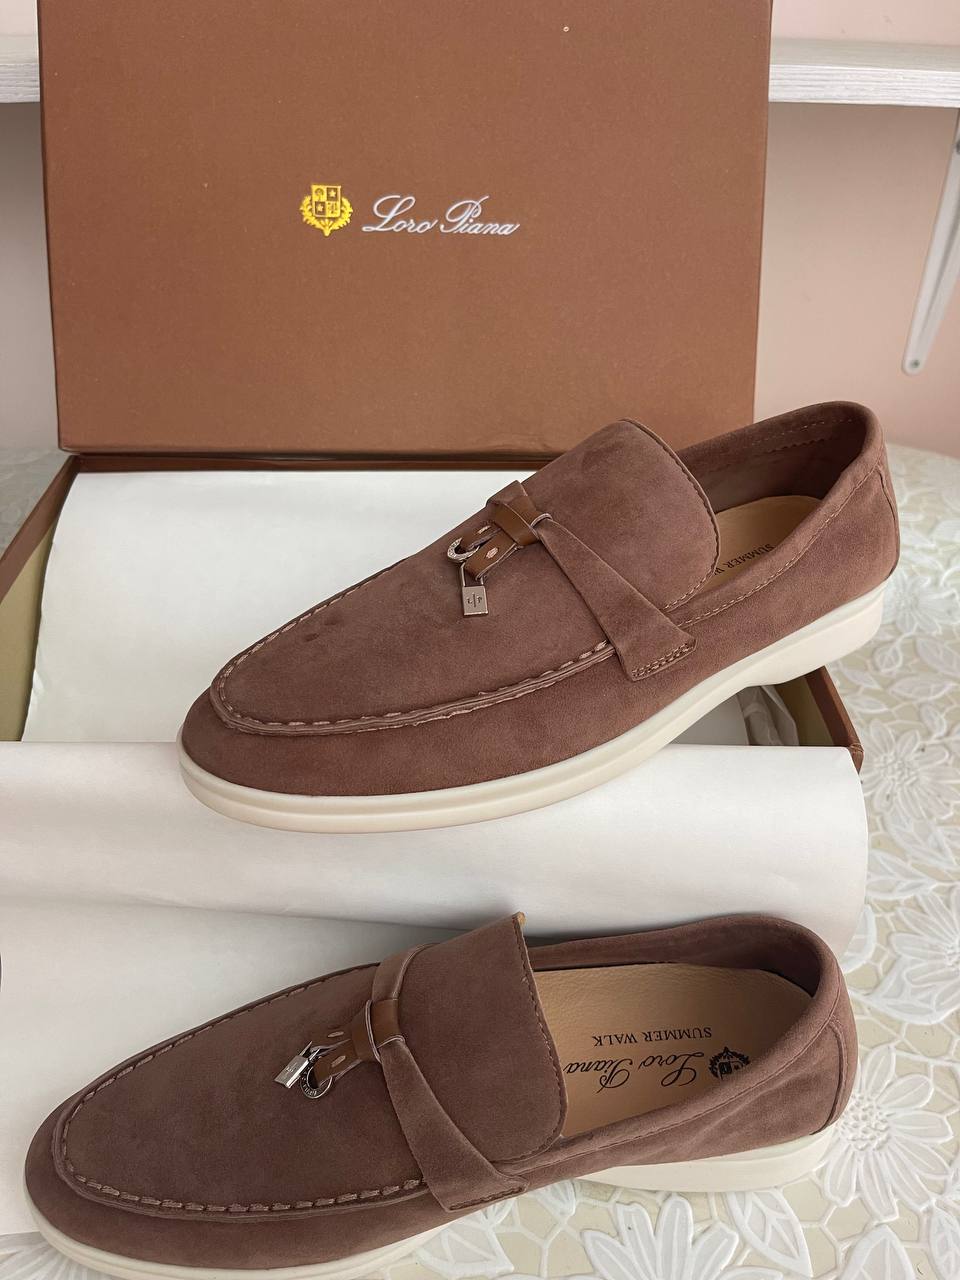 Loro Piana / suede лоферы (37 the size) фото 4